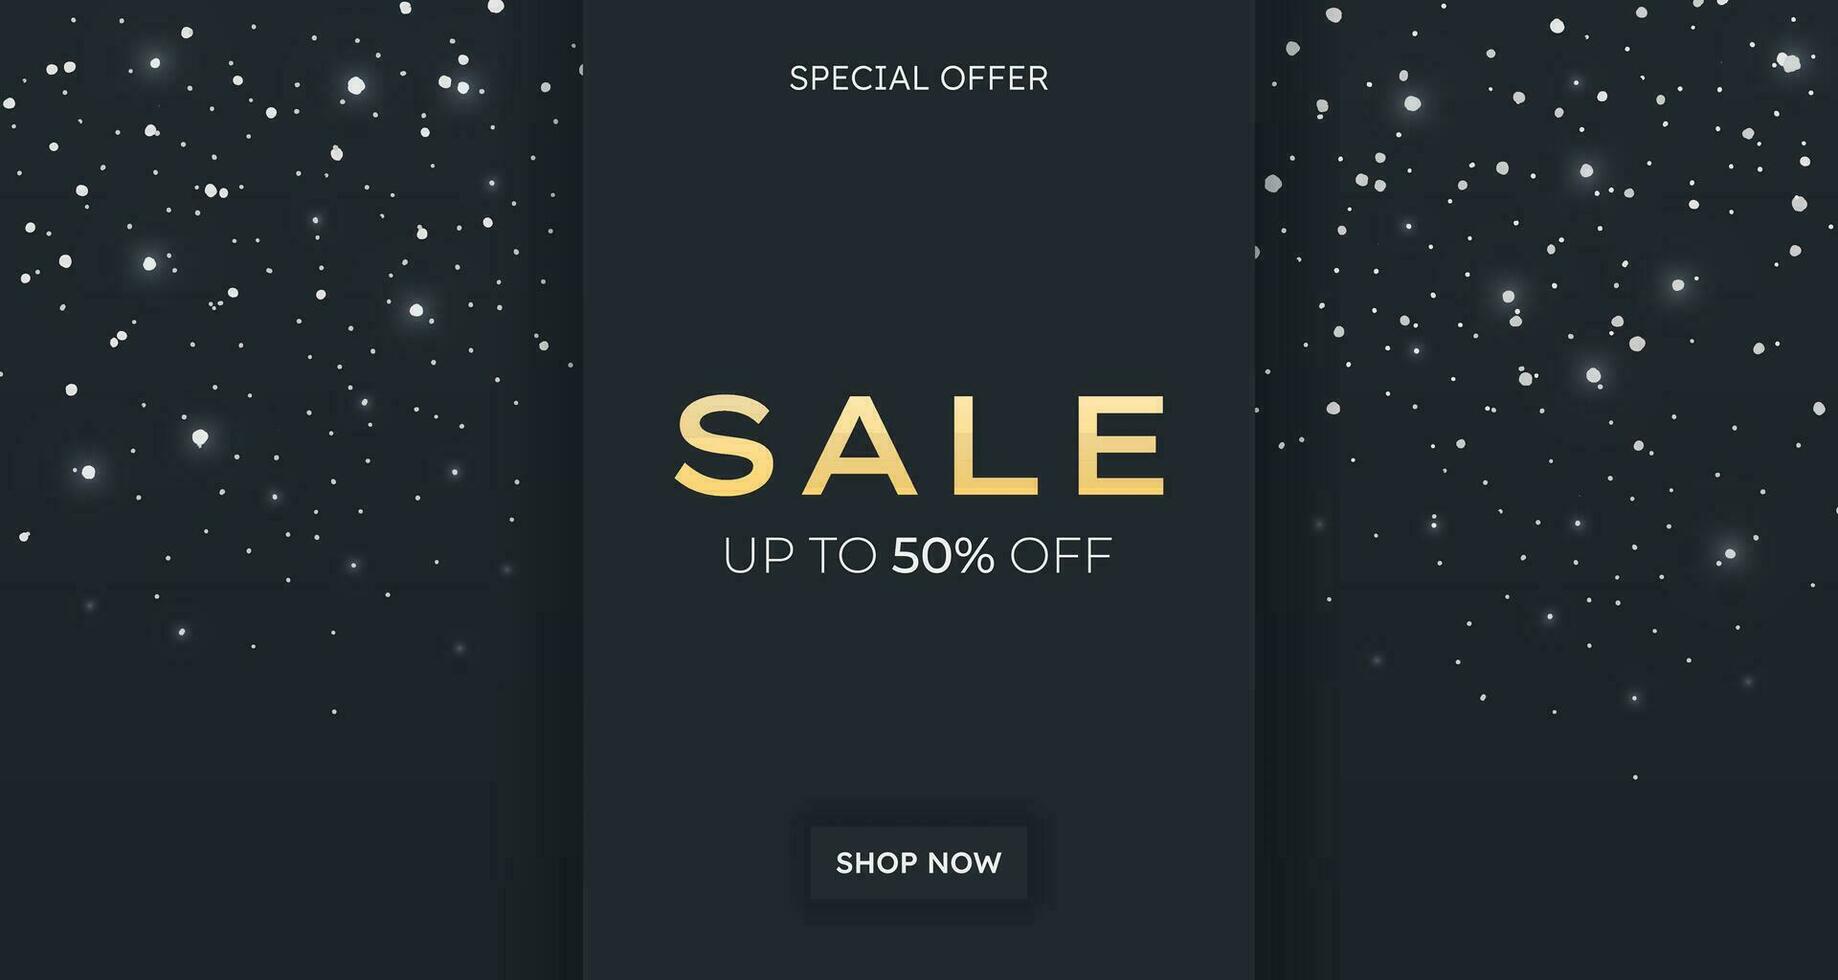 Horizontal sale banner. Web banner with black stripes on dark background with gold letters, glitter and confetti. Template design for holidays, Black Friday sale. Special Offer, luxury shopping poster vector